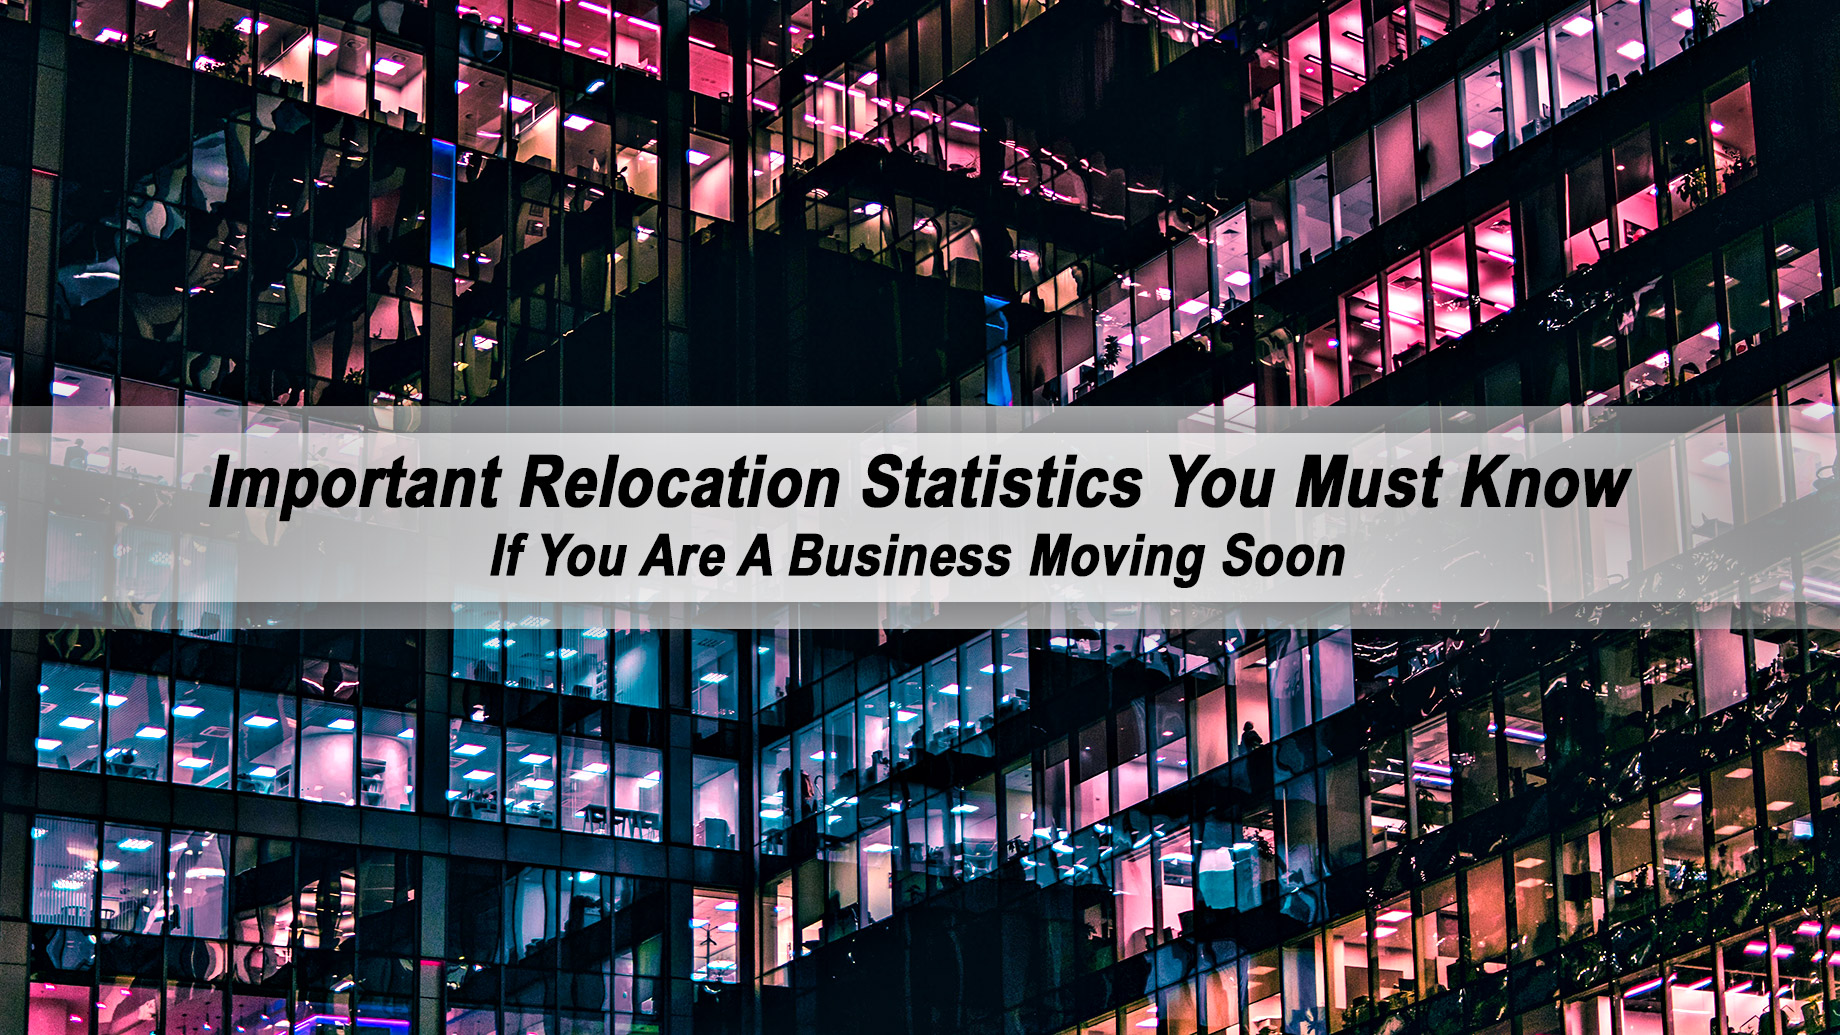 Important Relocation Statistics You Must Know If You Are A Business Moving Soon